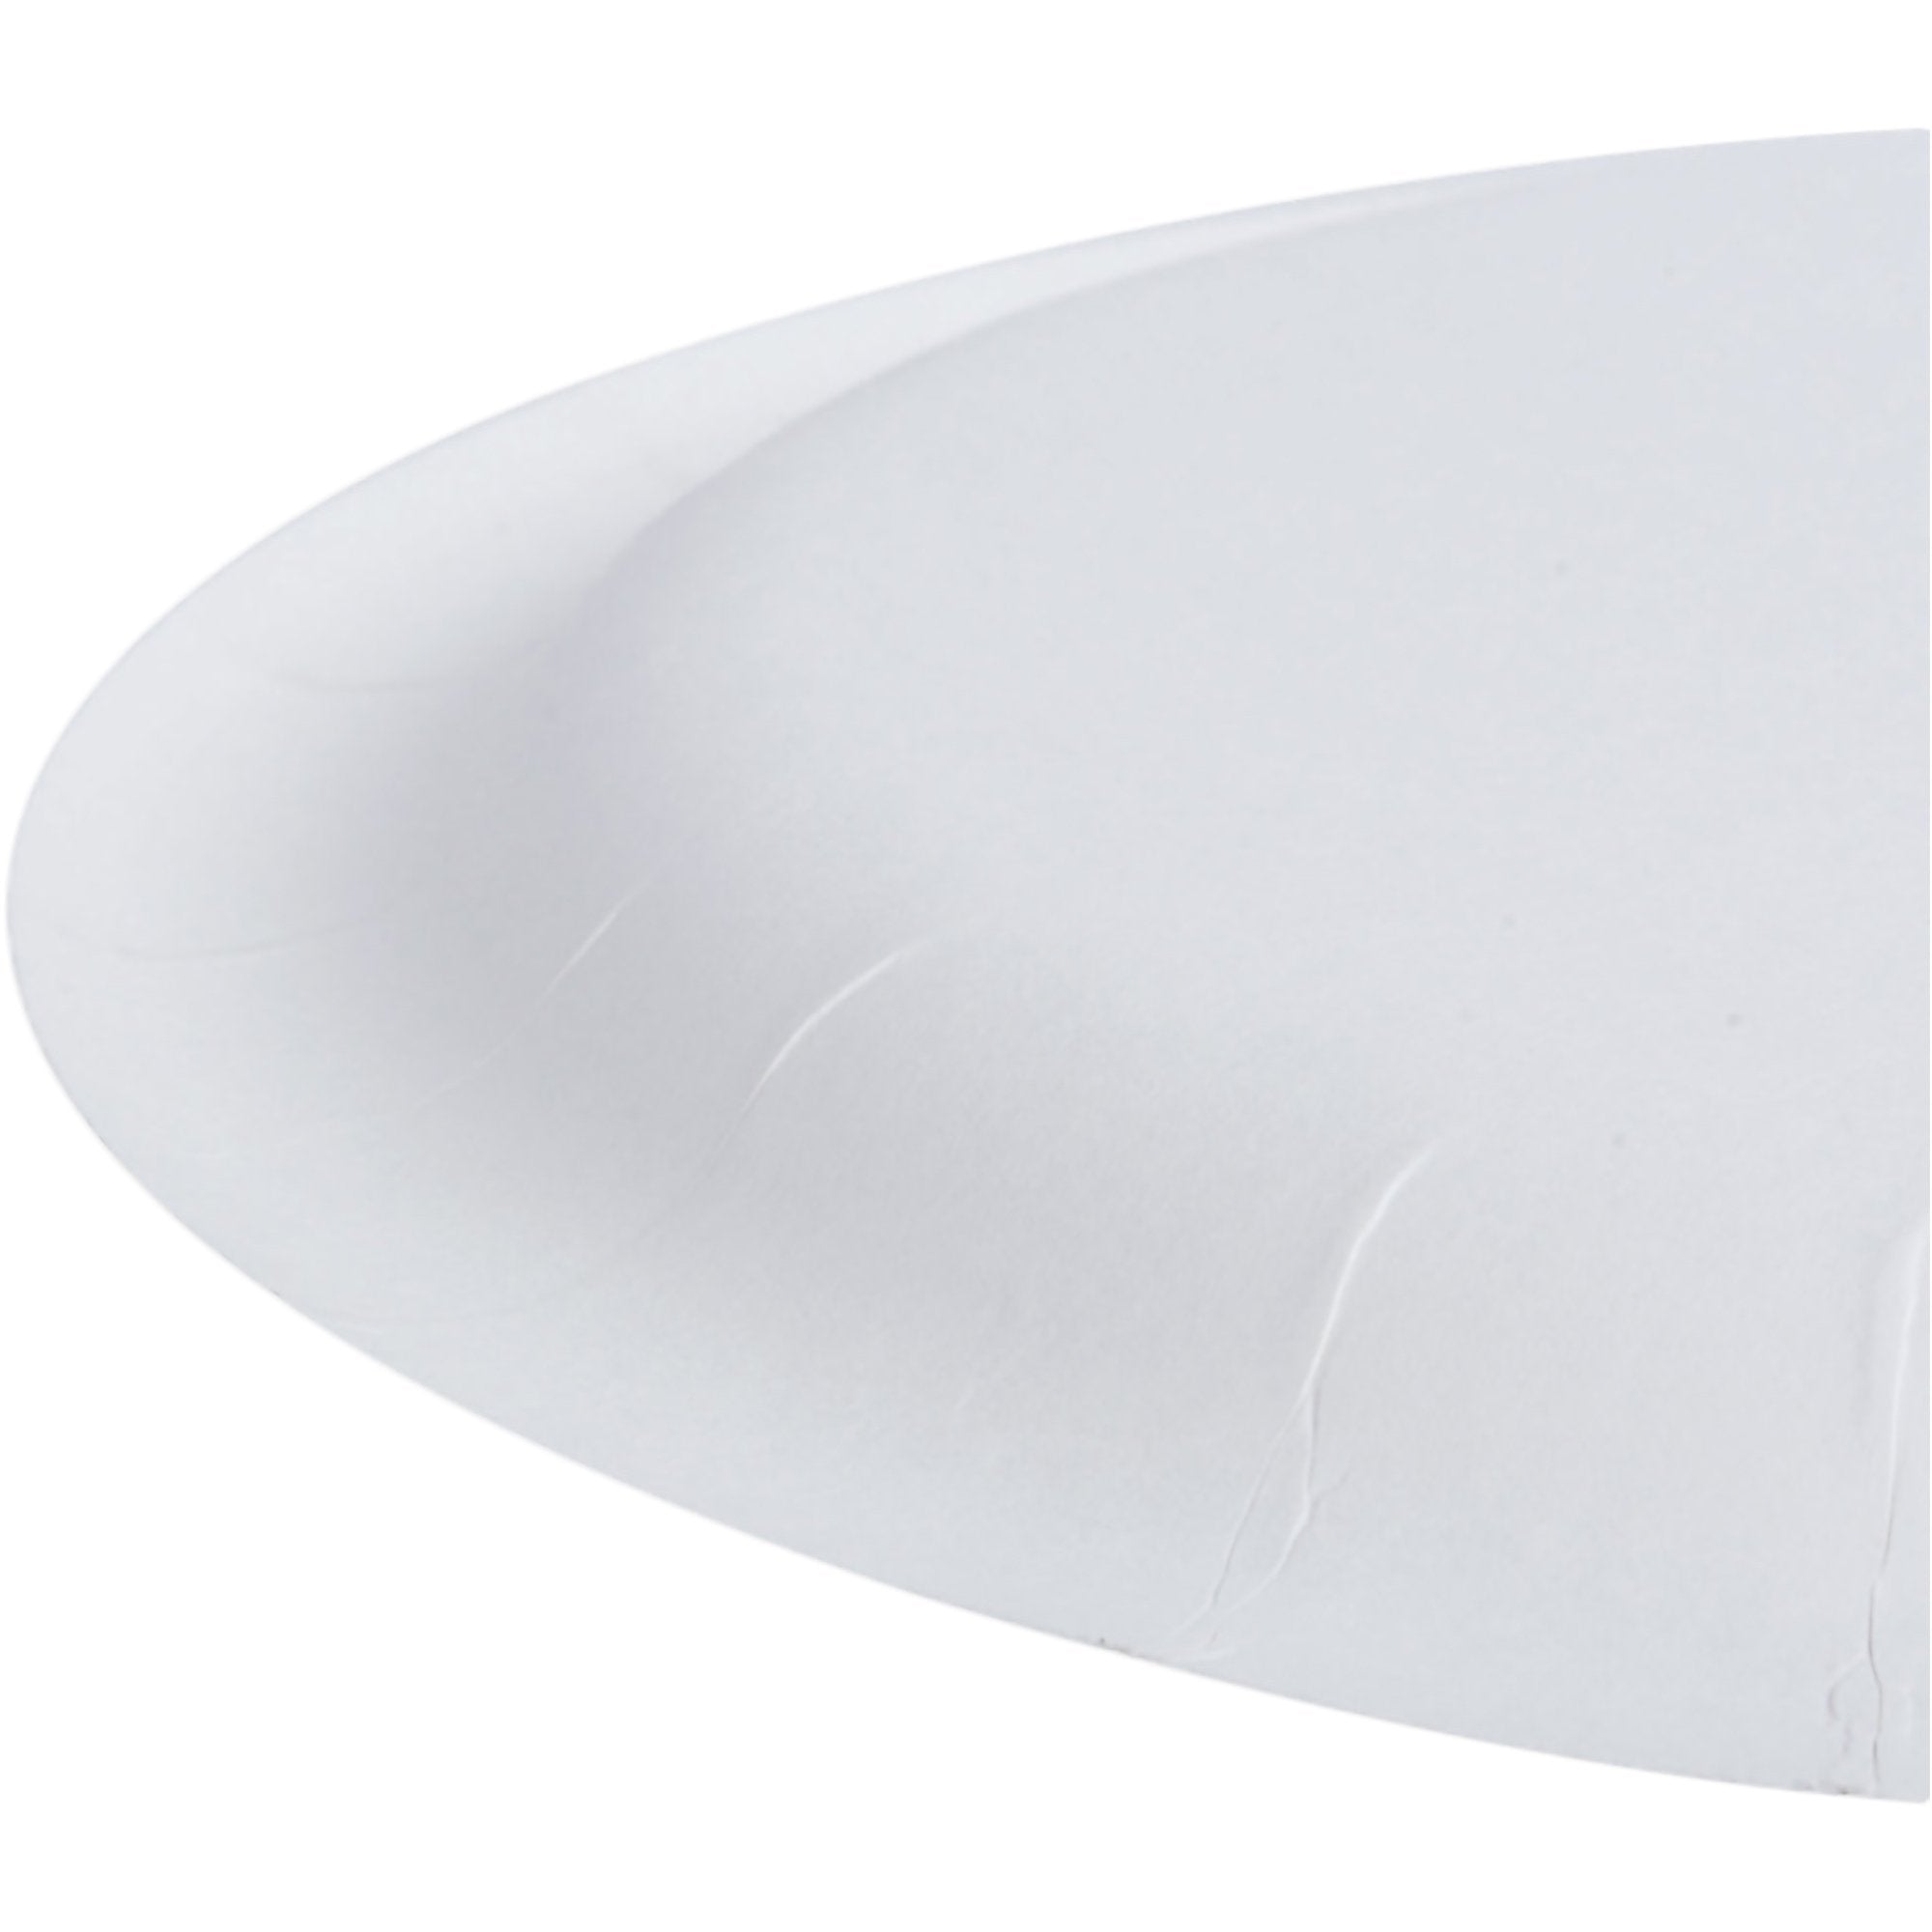 Bare® Coated Paper Plate, 8-1/2 Inch Diameter (125 Units)